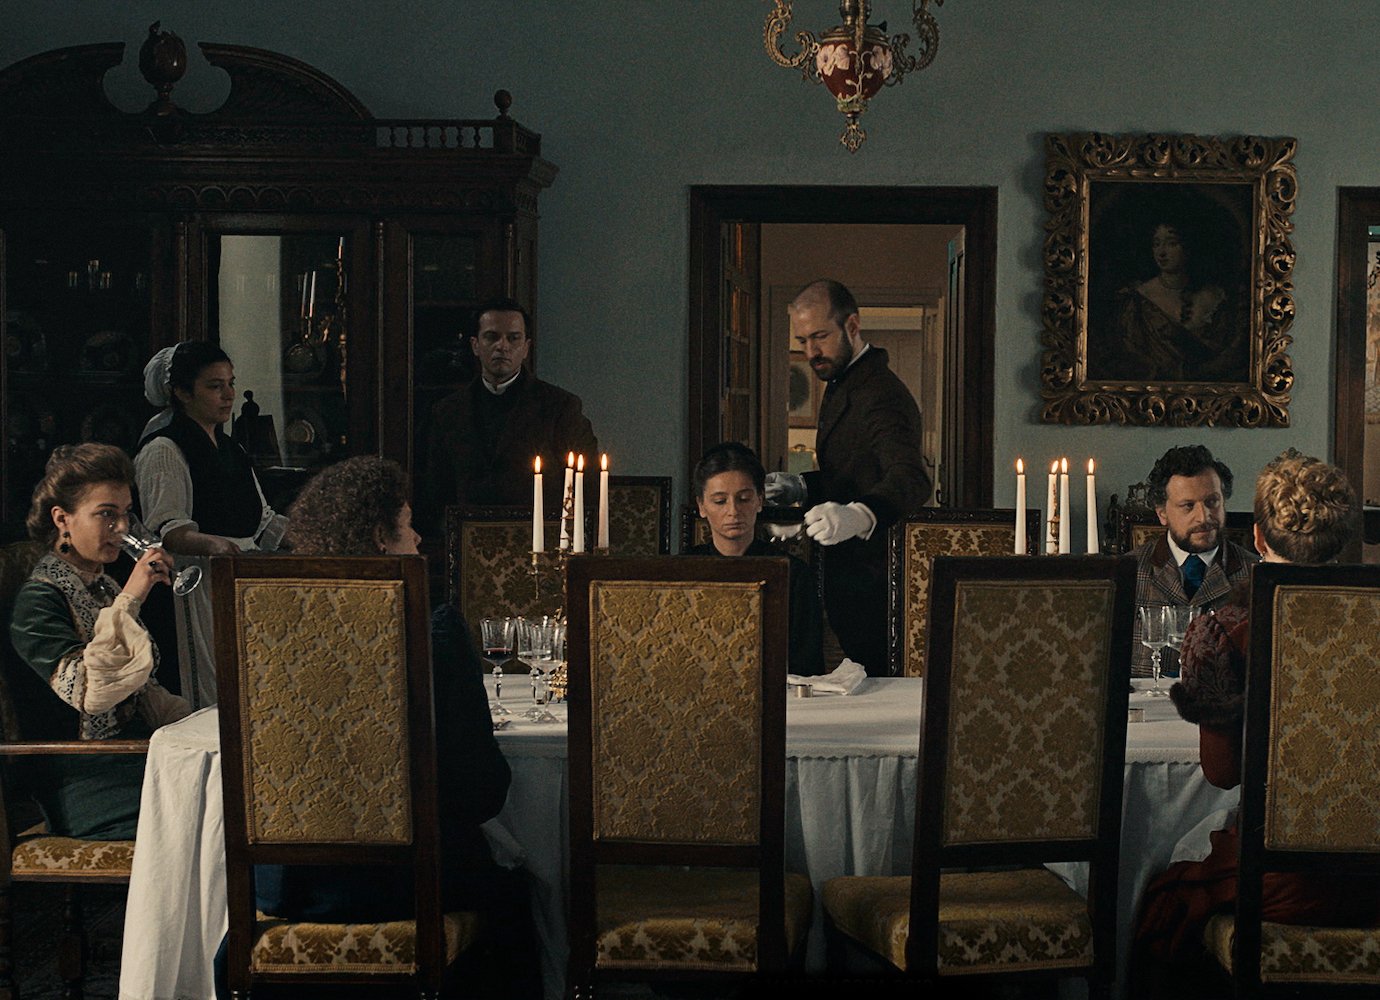 Set on a Transylvanian estate, Malmkrog is a journey through a dreamlike, philosophical dinner party | Film of the Week